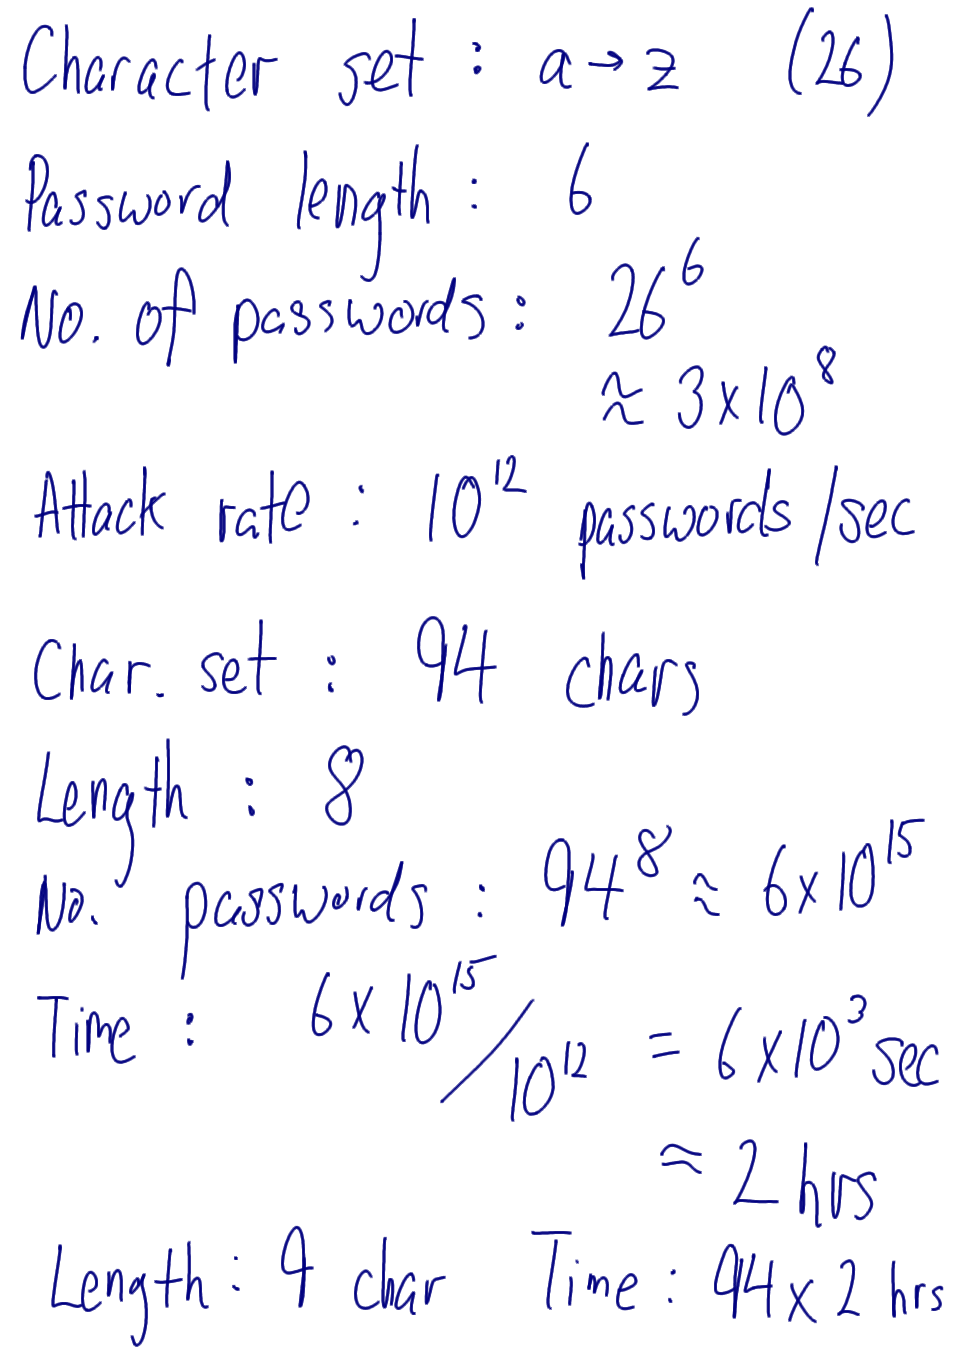 Password brute force examples